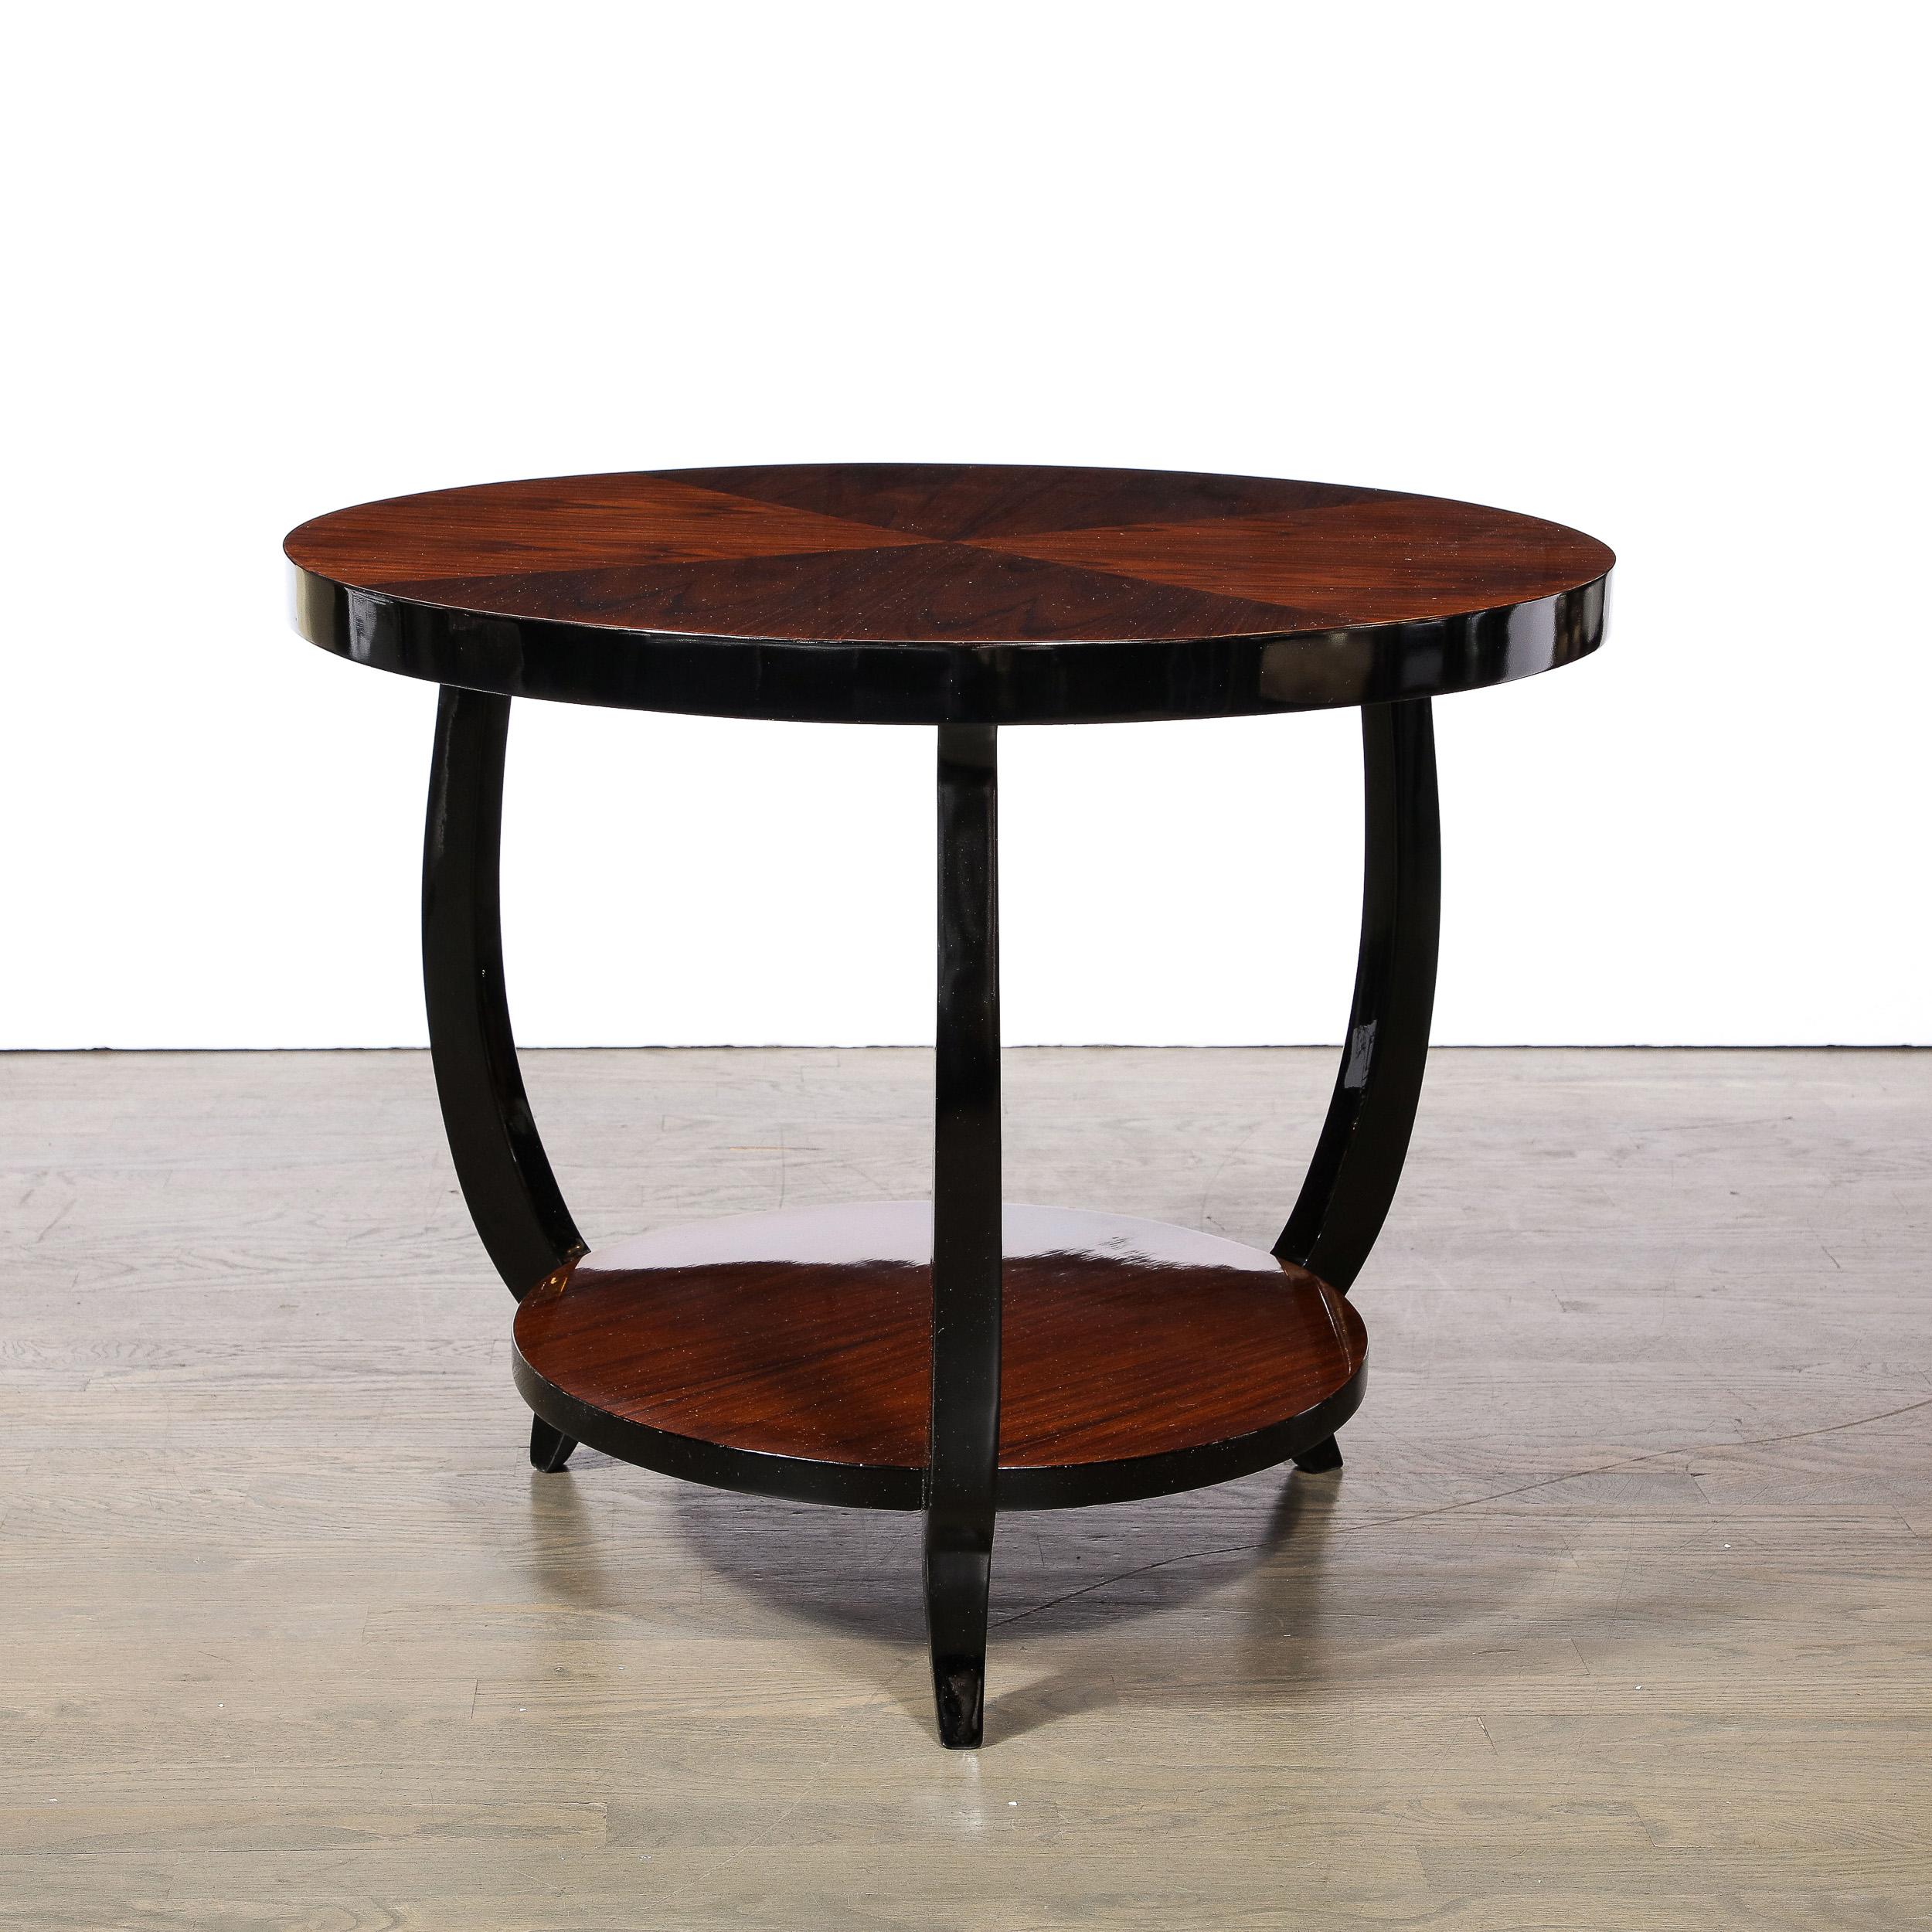 Art Deco Two-Tier Gueridon Table in Book-matched Walnut & Black Lacquer  For Sale 1